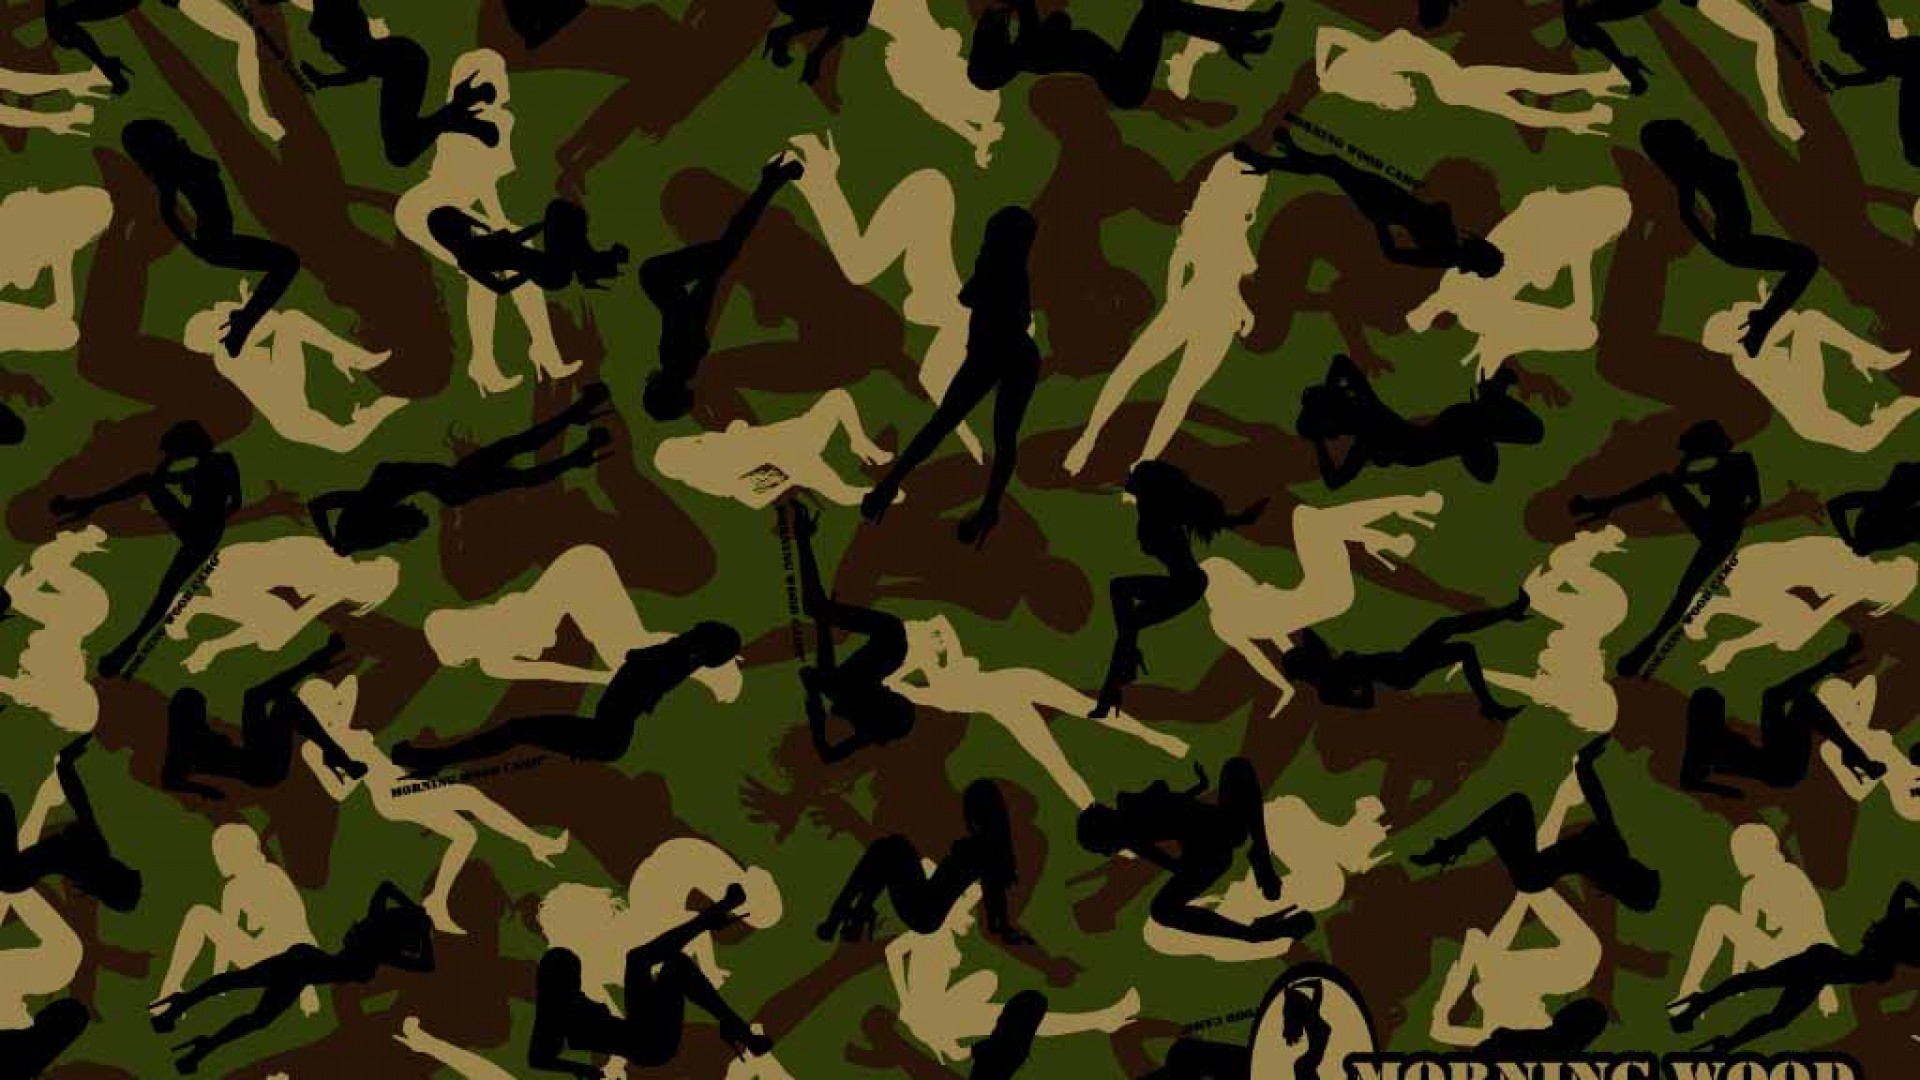 Camouflage wallpaper | 1920x1080 | #55582